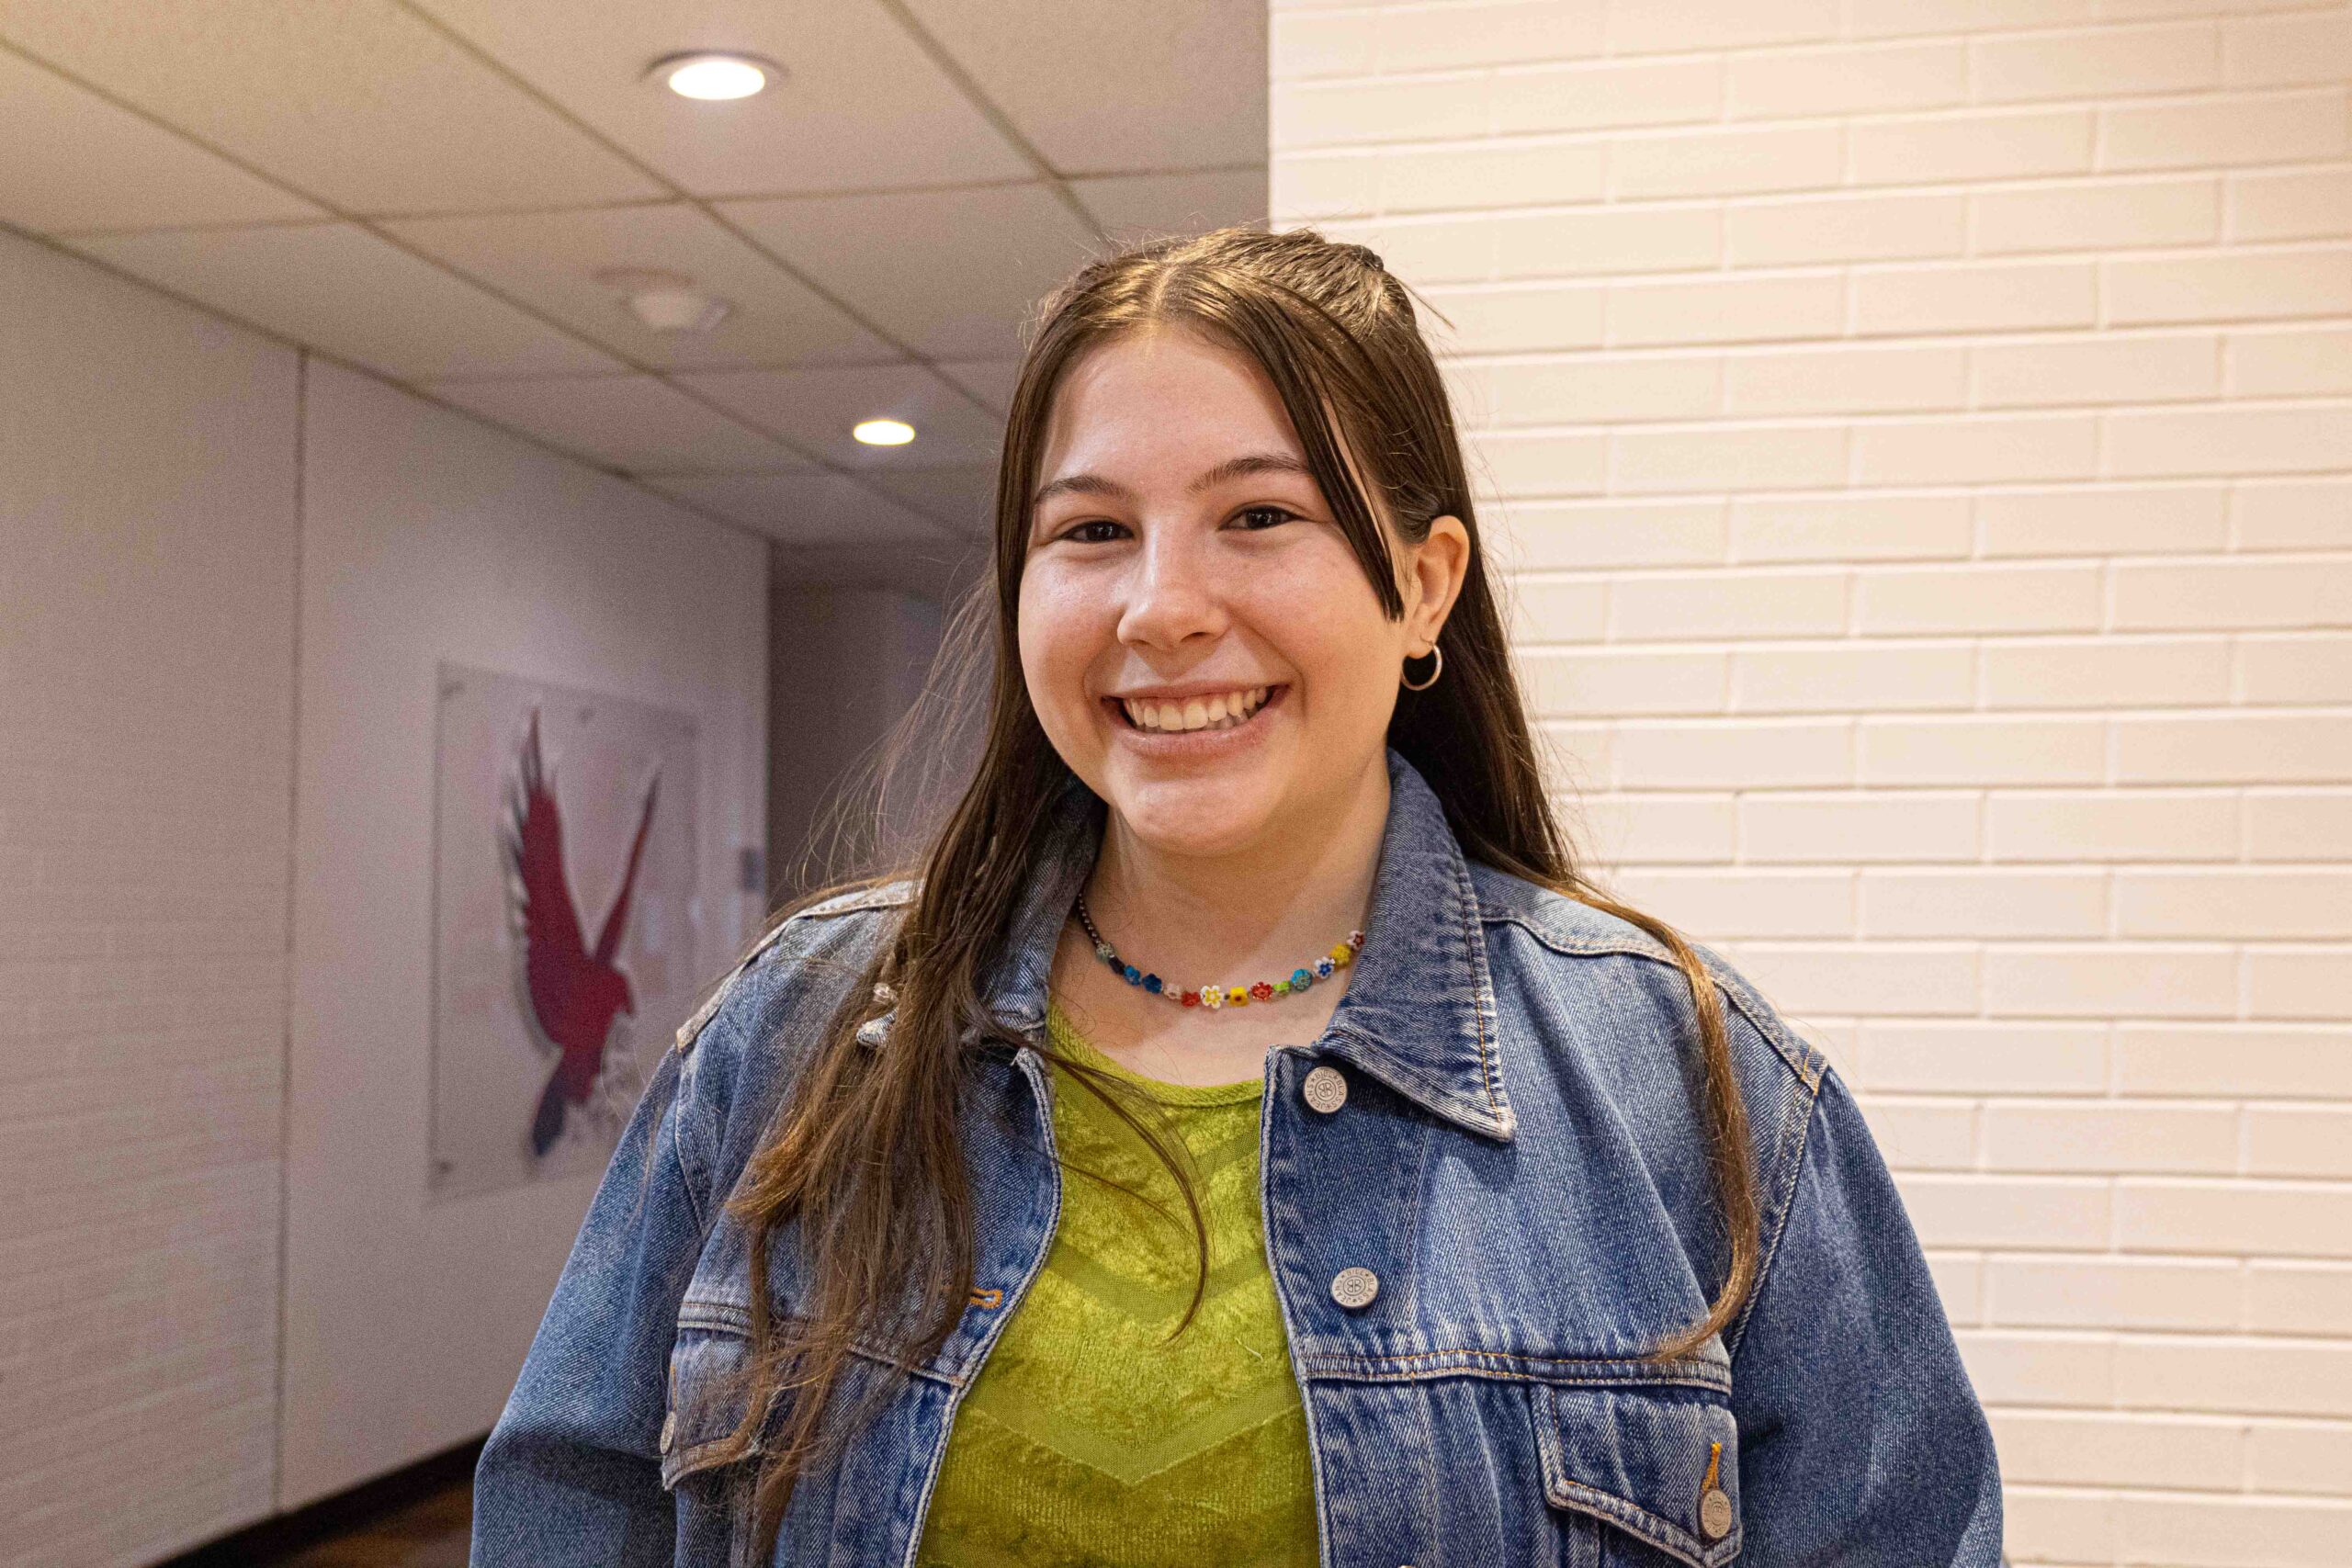 Kaylee Seitz, a junior social media and public relations major, helped research for the project and run a social media campaign for Montclair Culturs.
Allen Macaraeg | The Montclarion